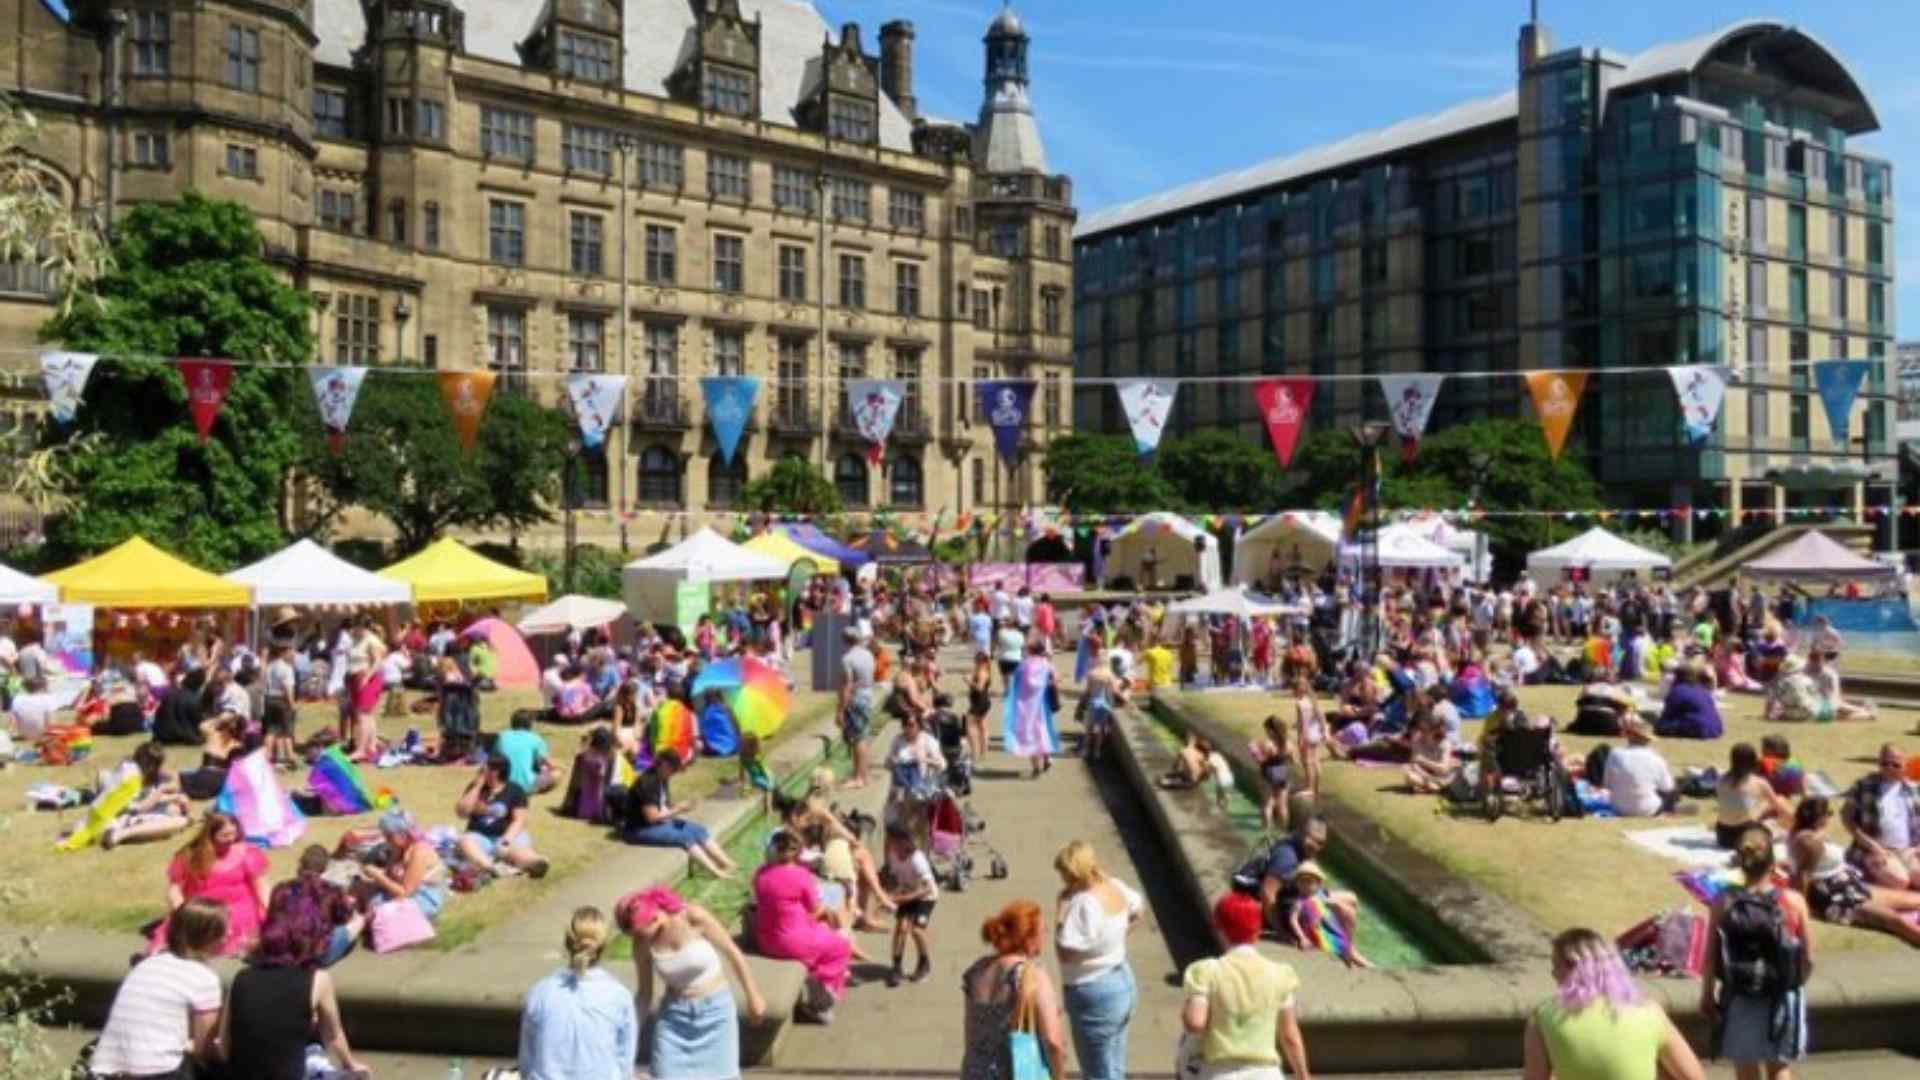 Image of the peace gardens full of people, stalls and flags for the Pinknic event